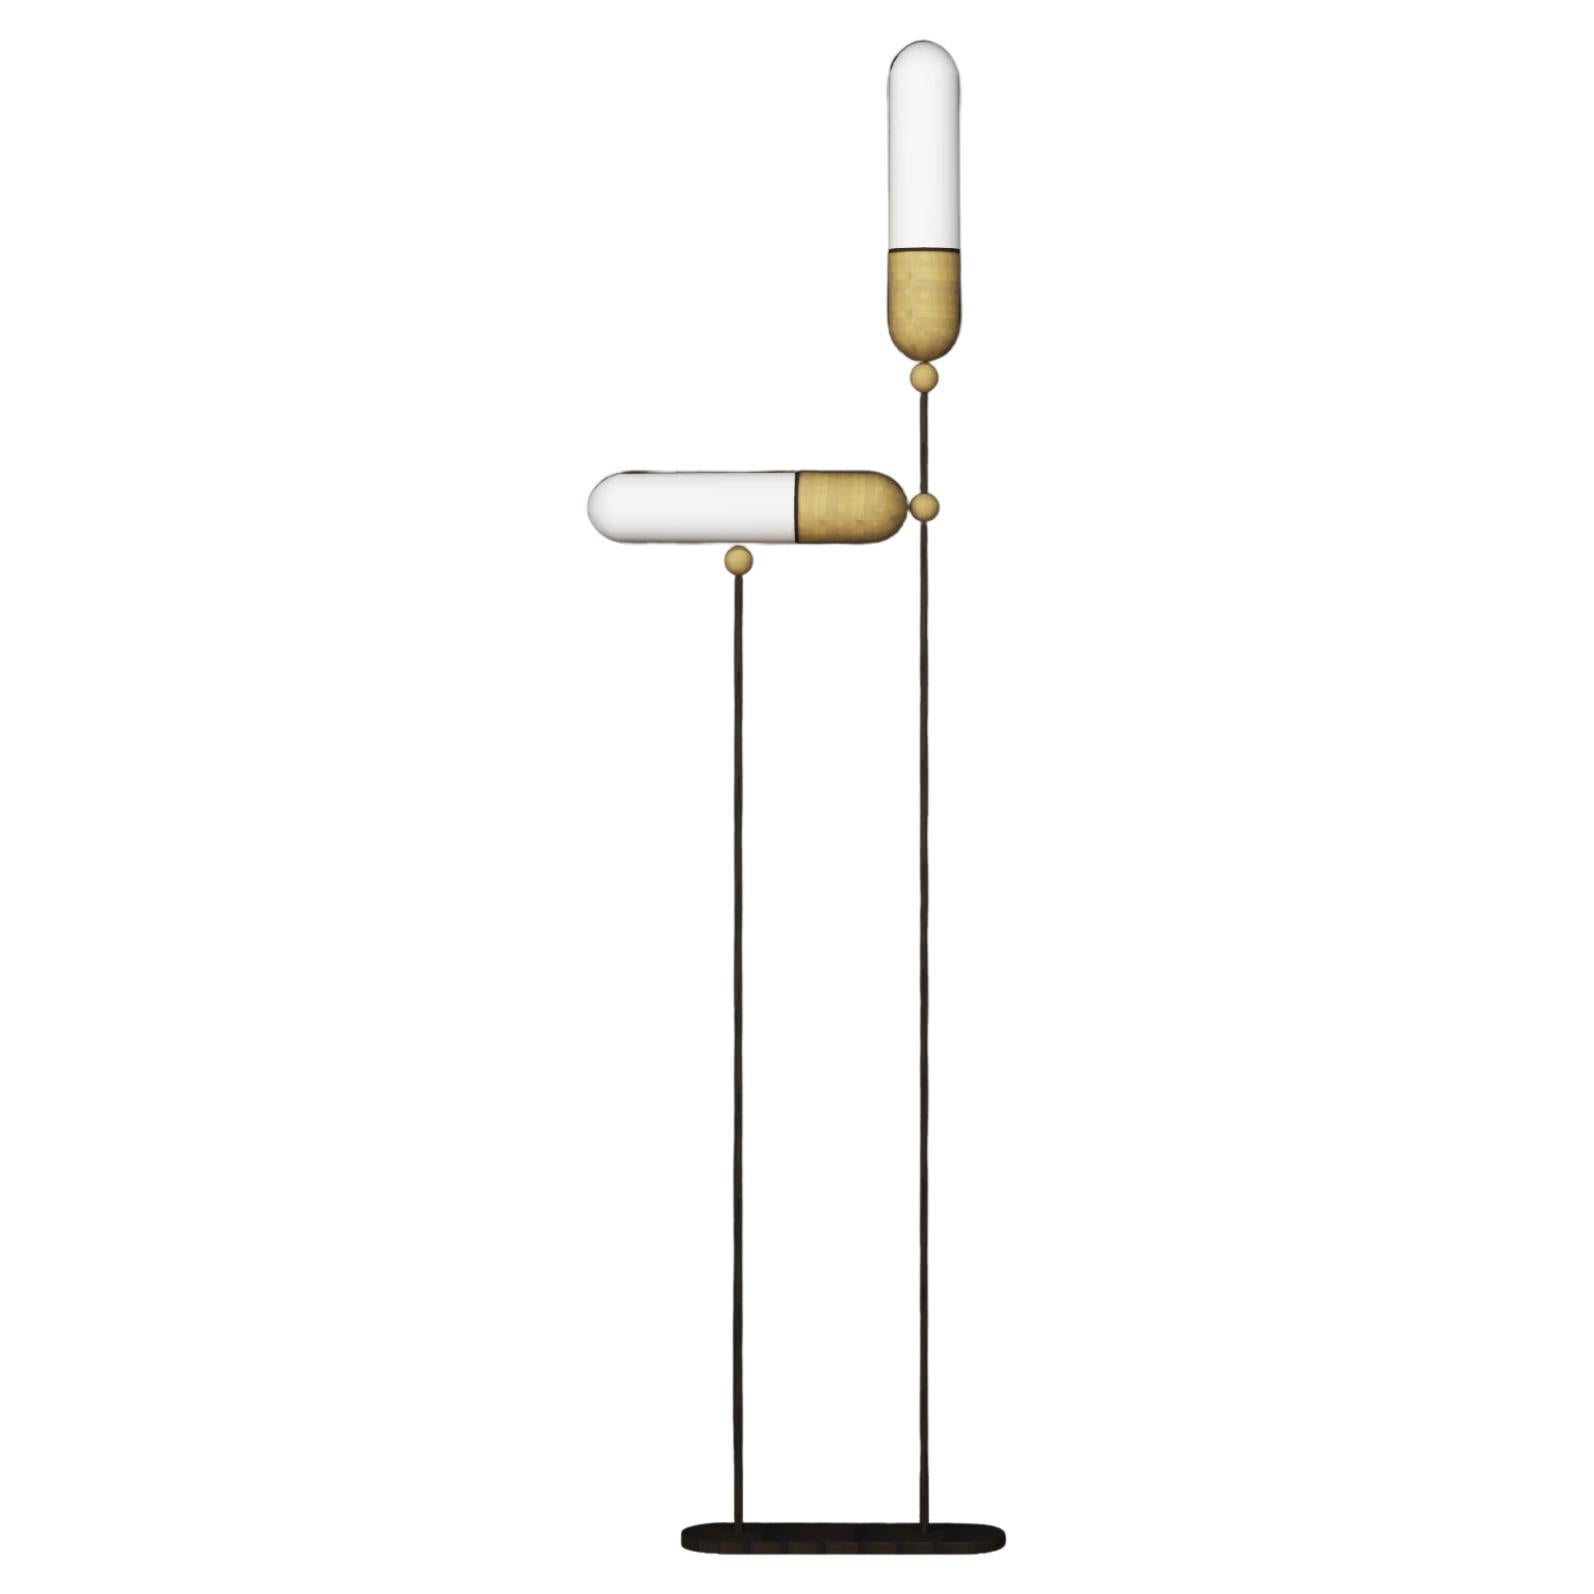 Imagin Deco Floor Lamp in Antique Bronze, Antique Brass and Frosted Glass